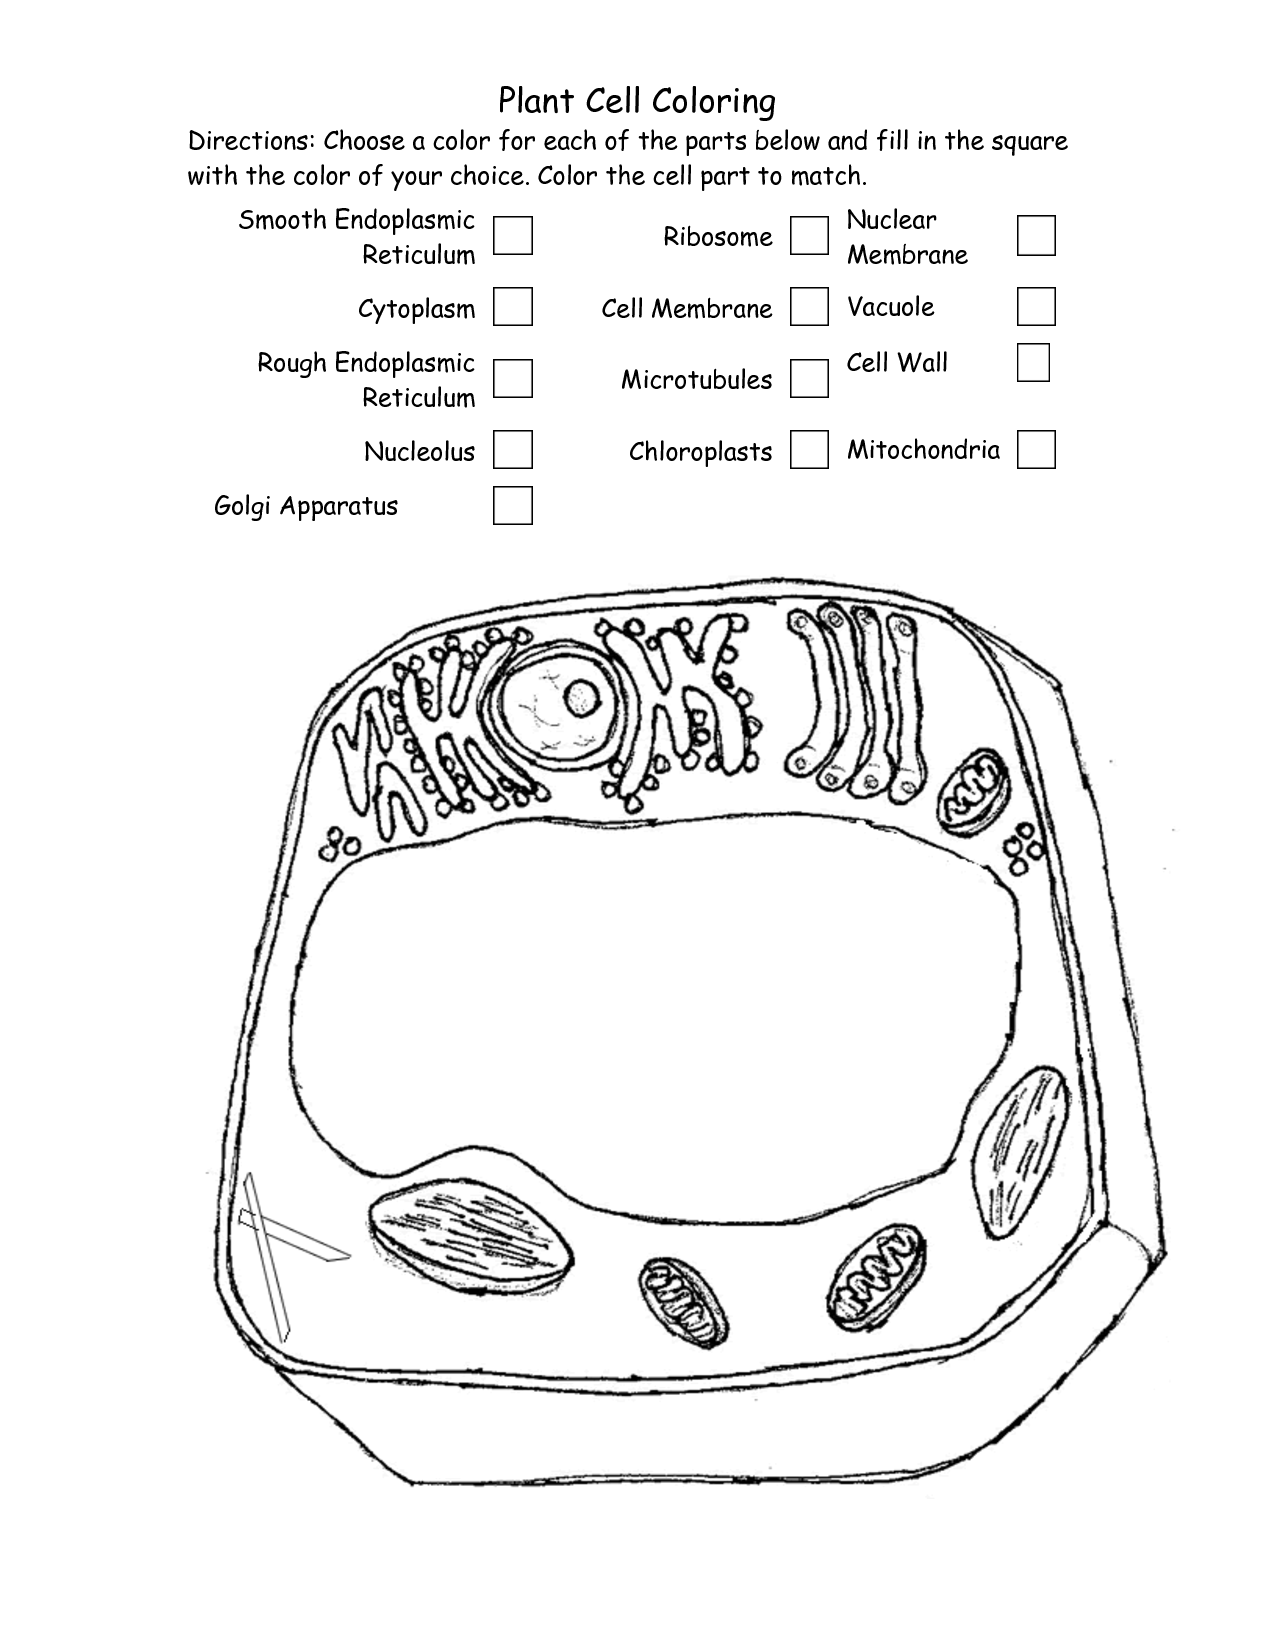 animal-and-plant-cell-coloring-worksheet-answers-herbalful